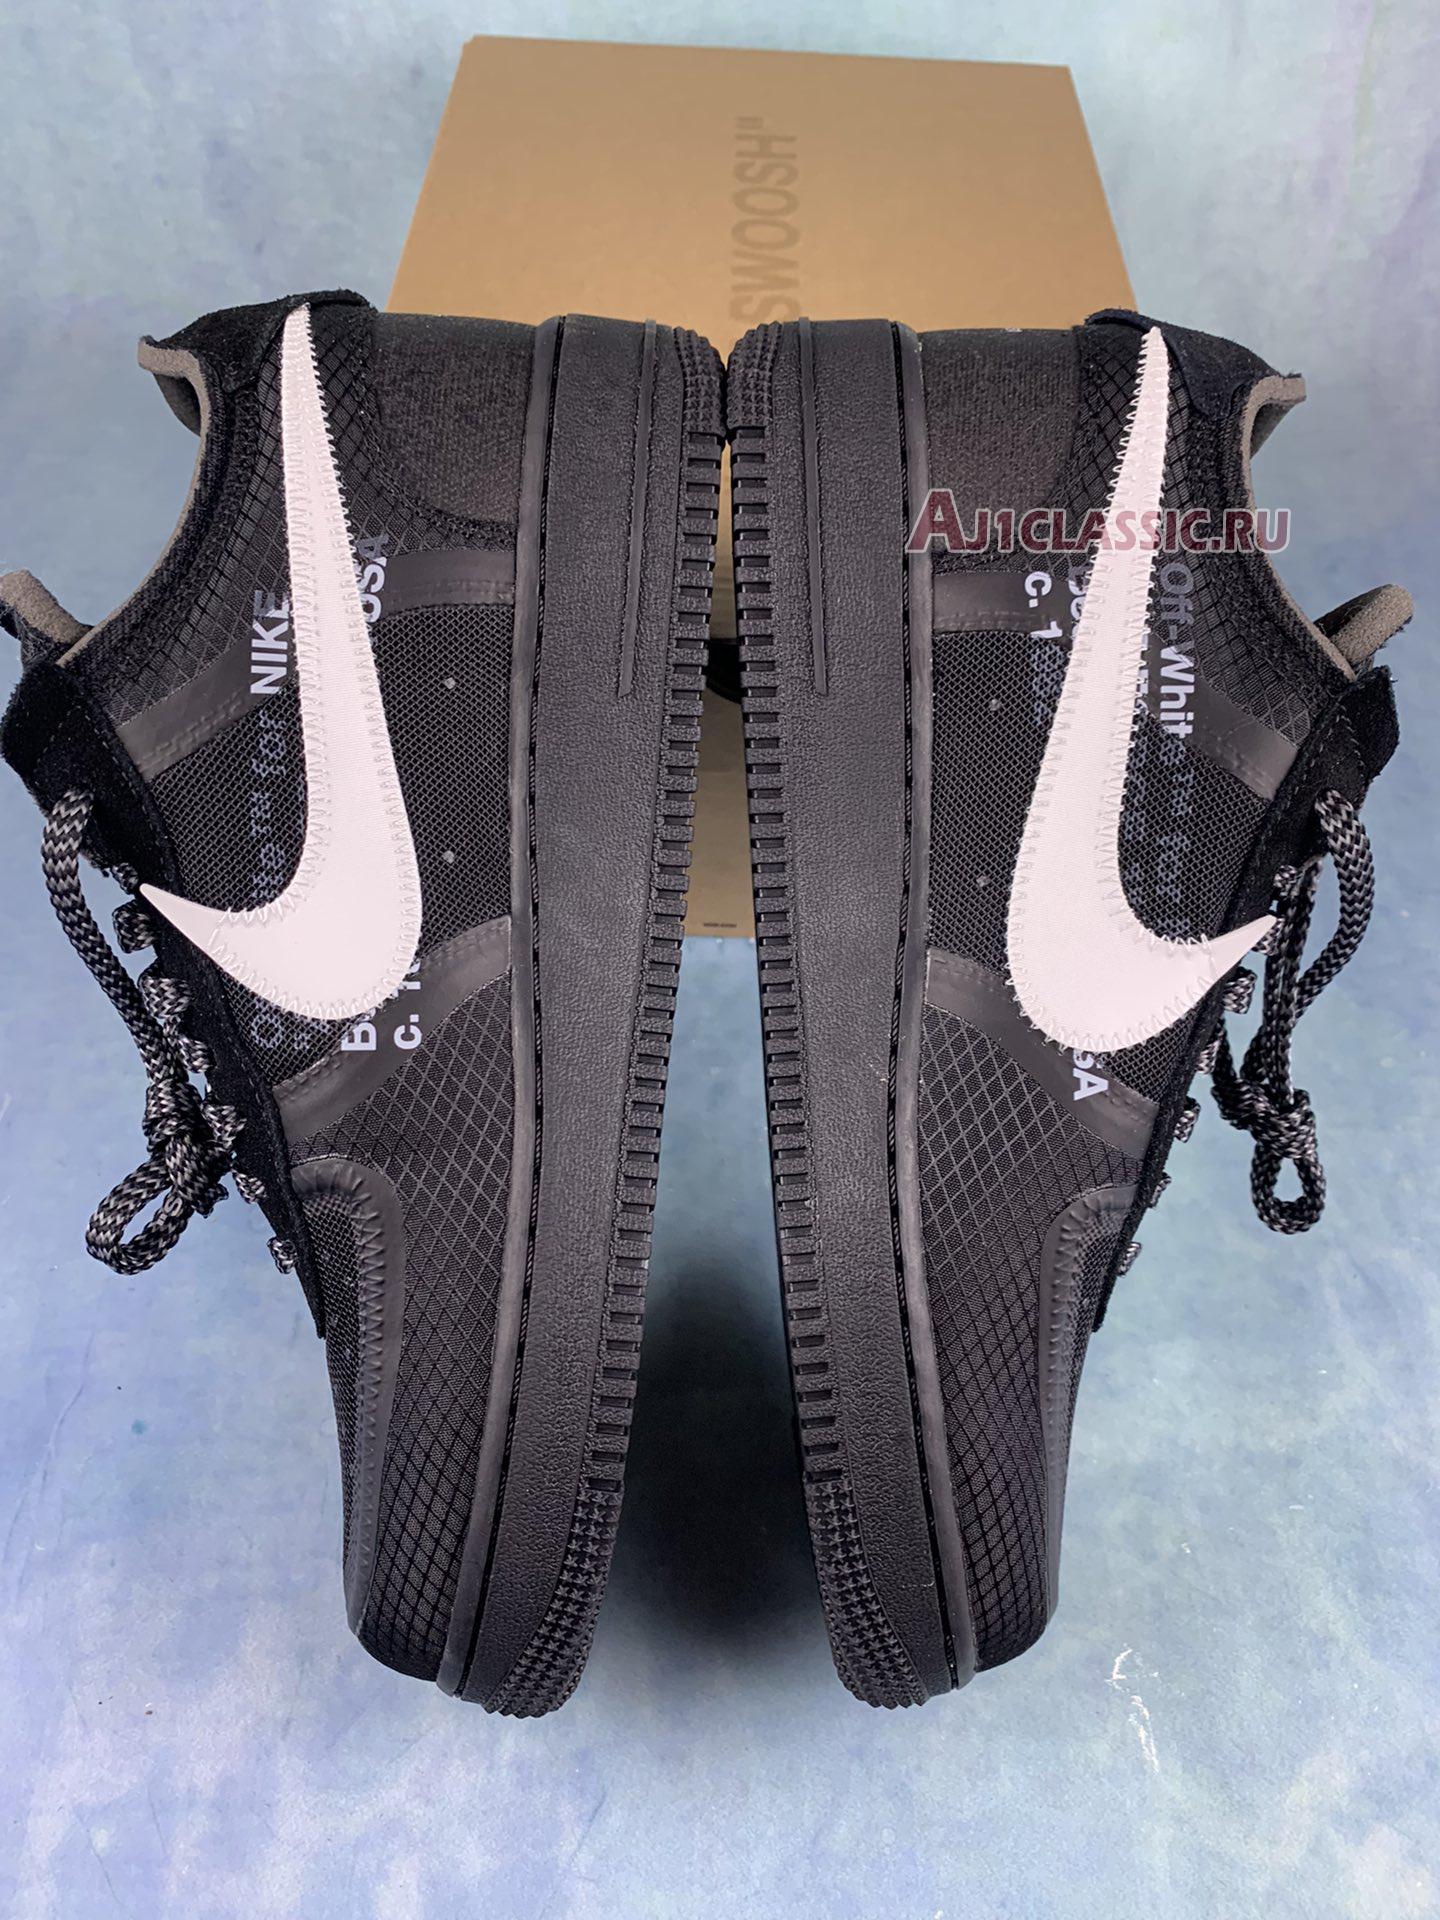 Off-White x Nike Air Force 1 Low "Black" AO4606-001-2